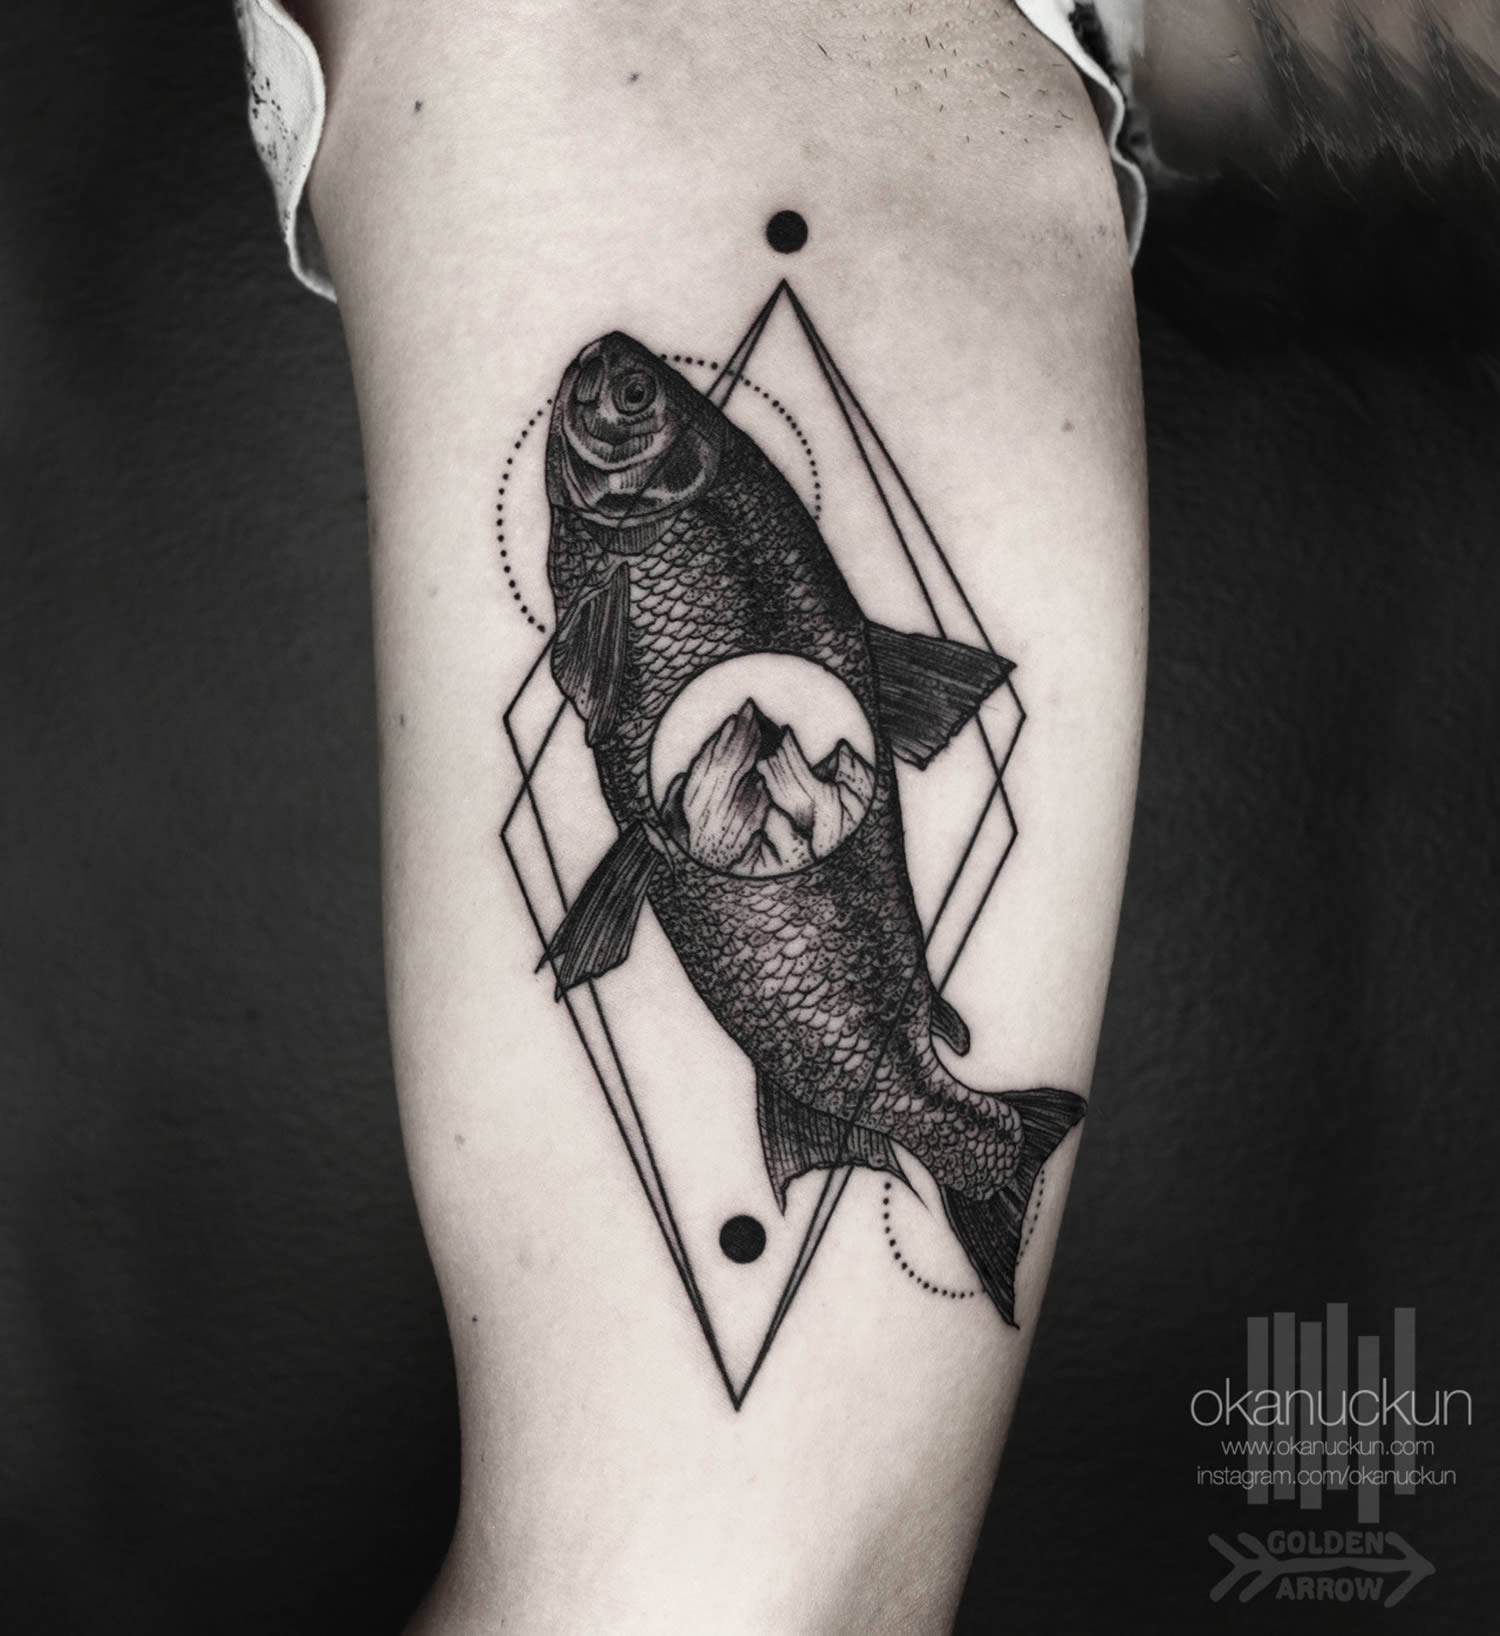 Minimalistic stle two opposite fish tattooed on the